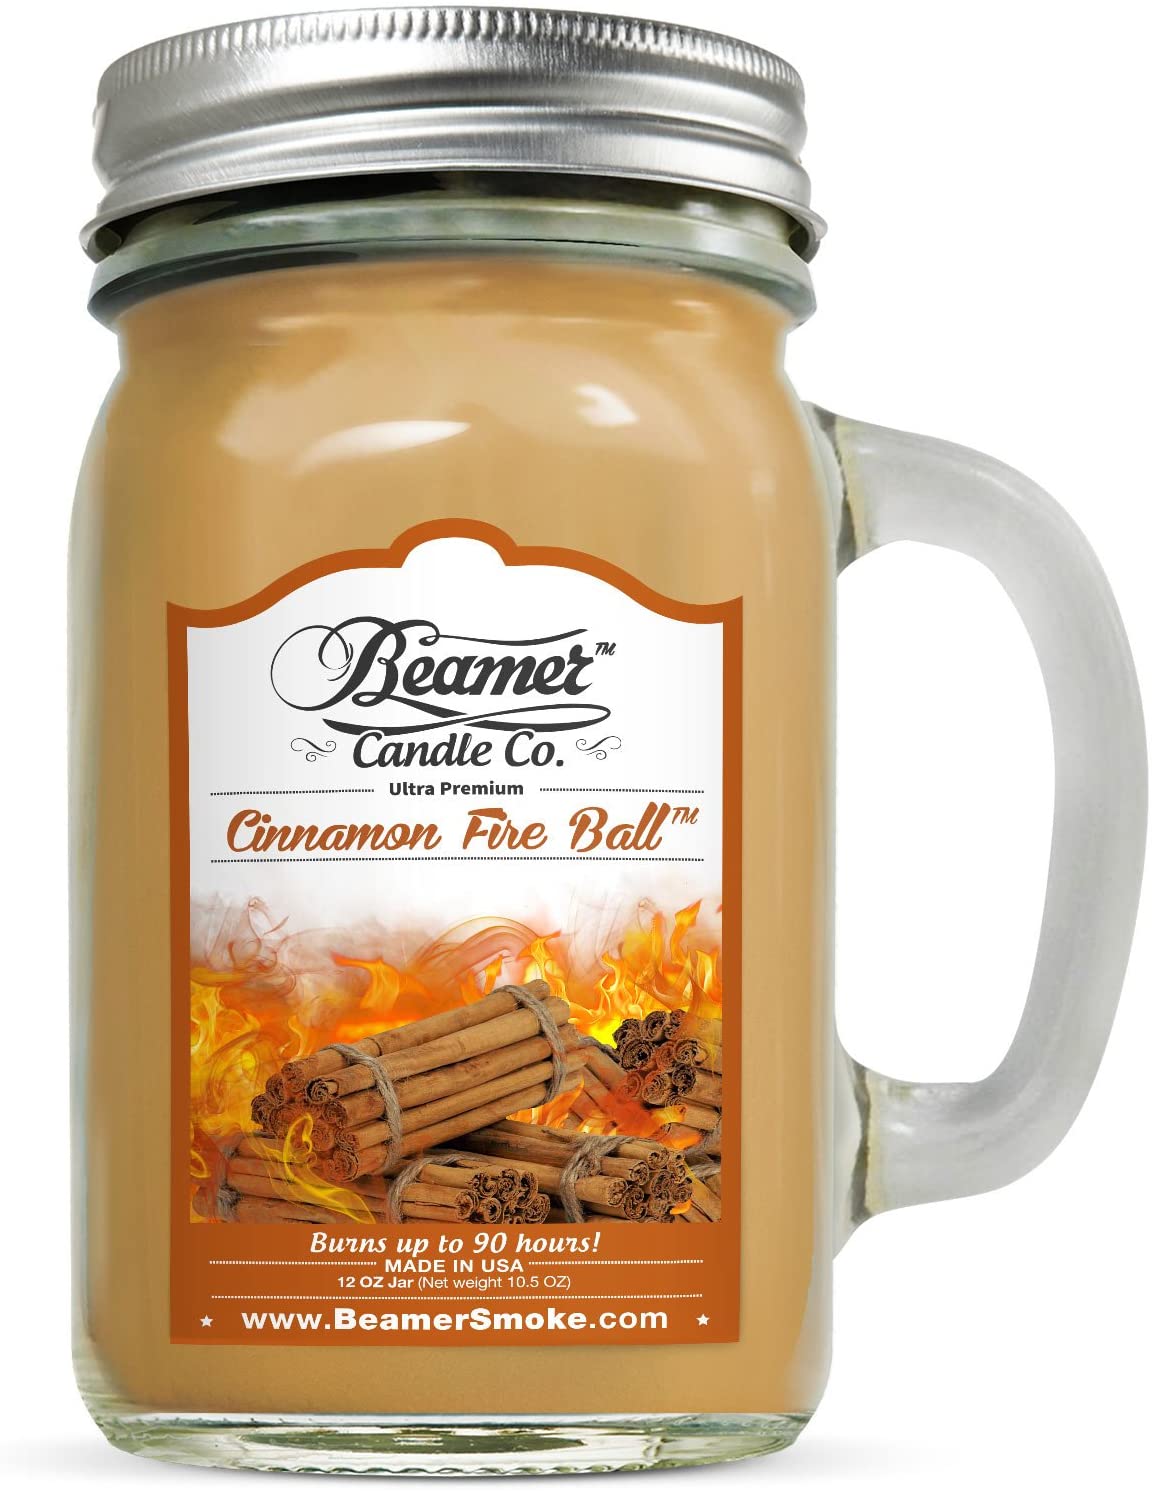 12oz Cinnamon Fire Ball Scented Beamer Candle Co. Ultra Premium Jar Candle. 90 Hr Burn Time. USA Made